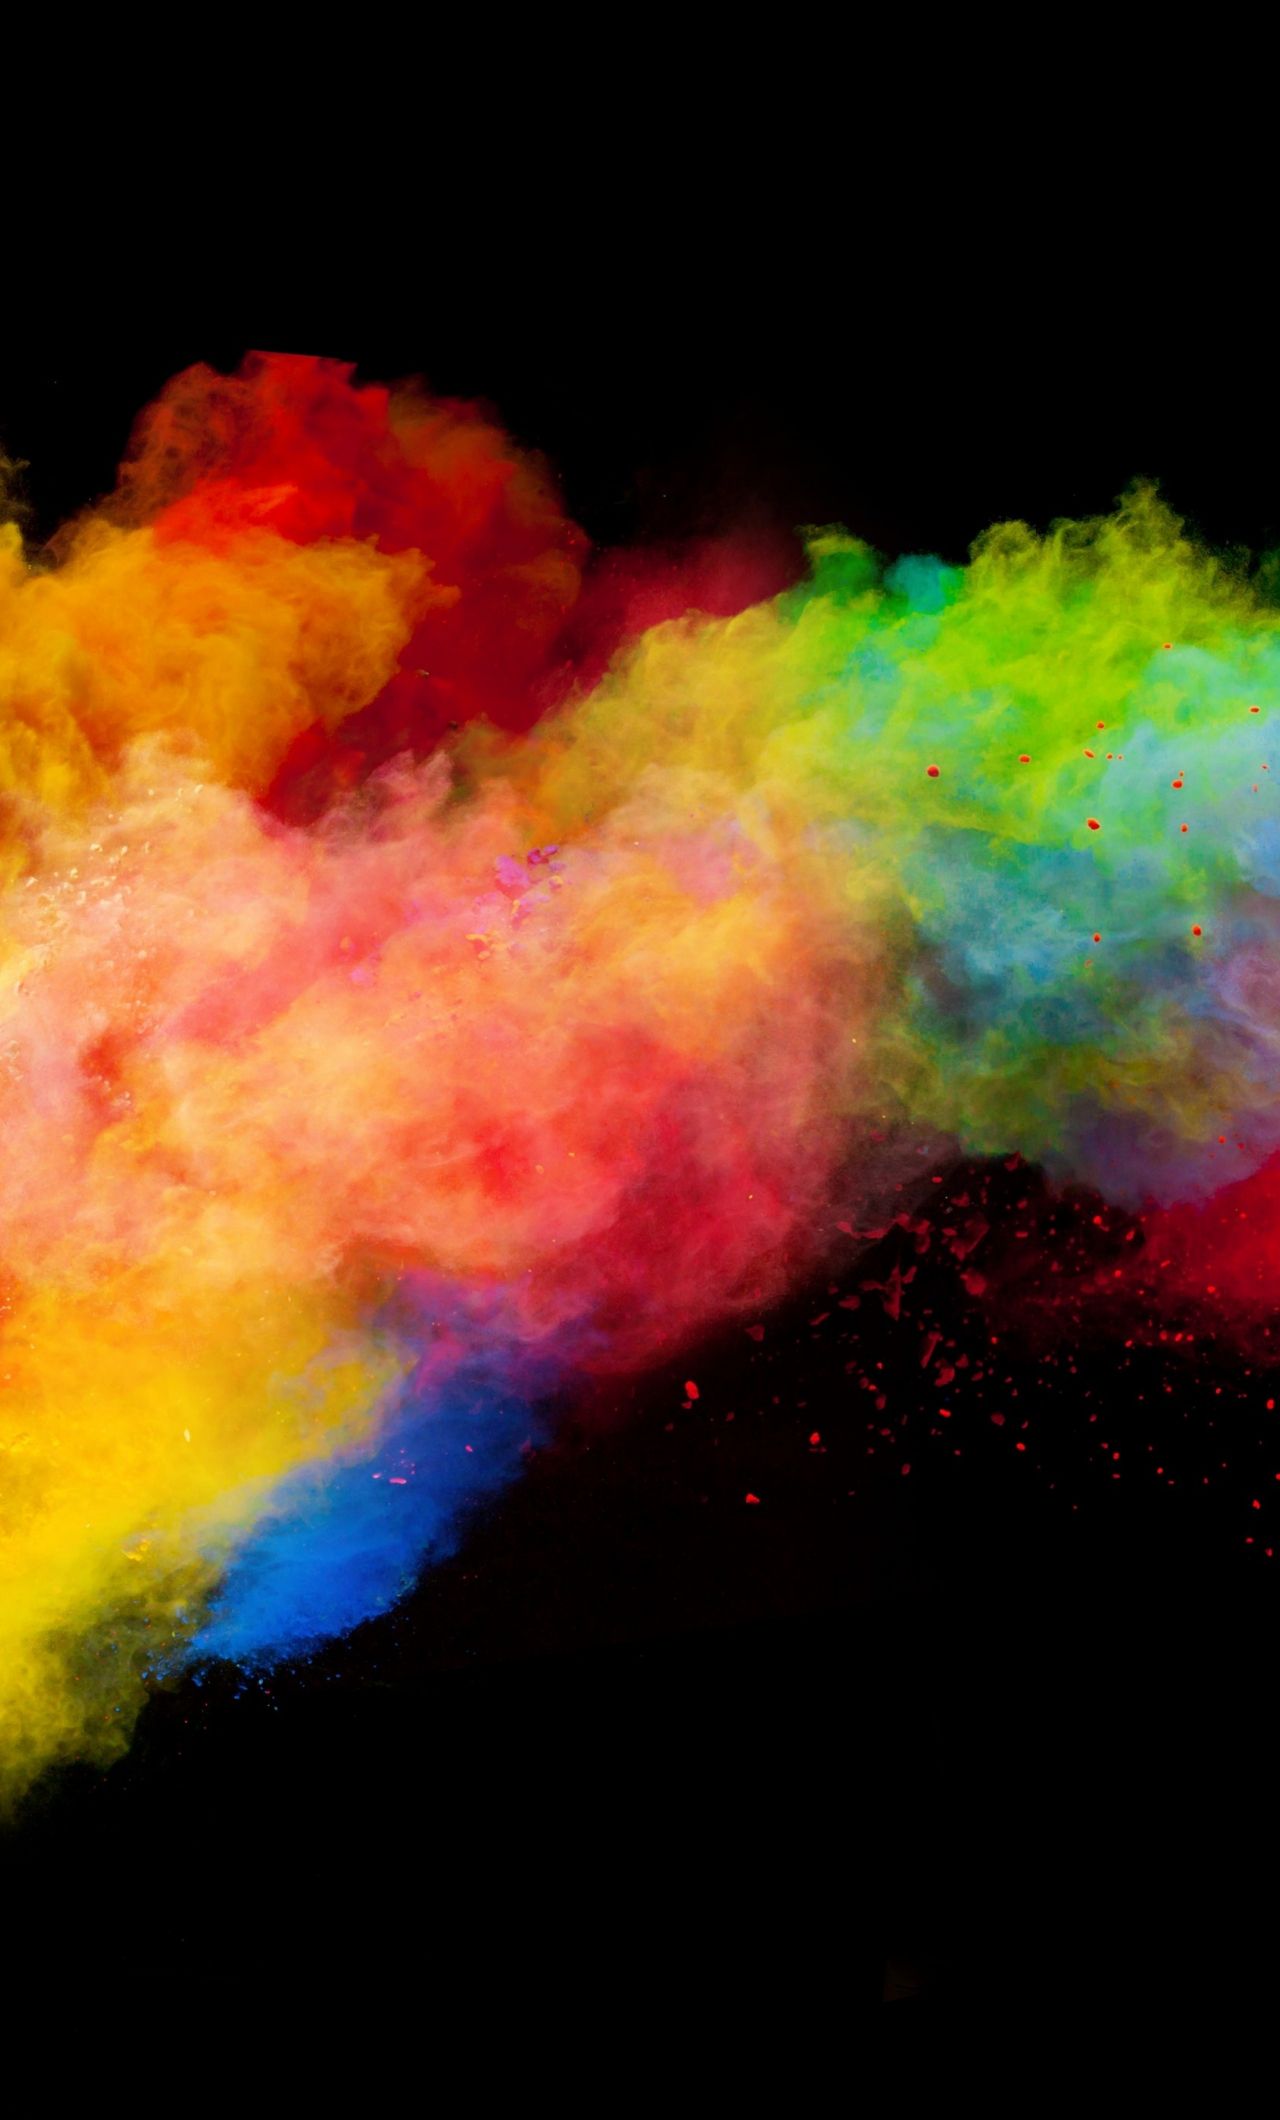 Download 1280x2120 wallpaper colorful, powder, explosion, iphone 6 plus, 1280x2120 HD image, background, 424